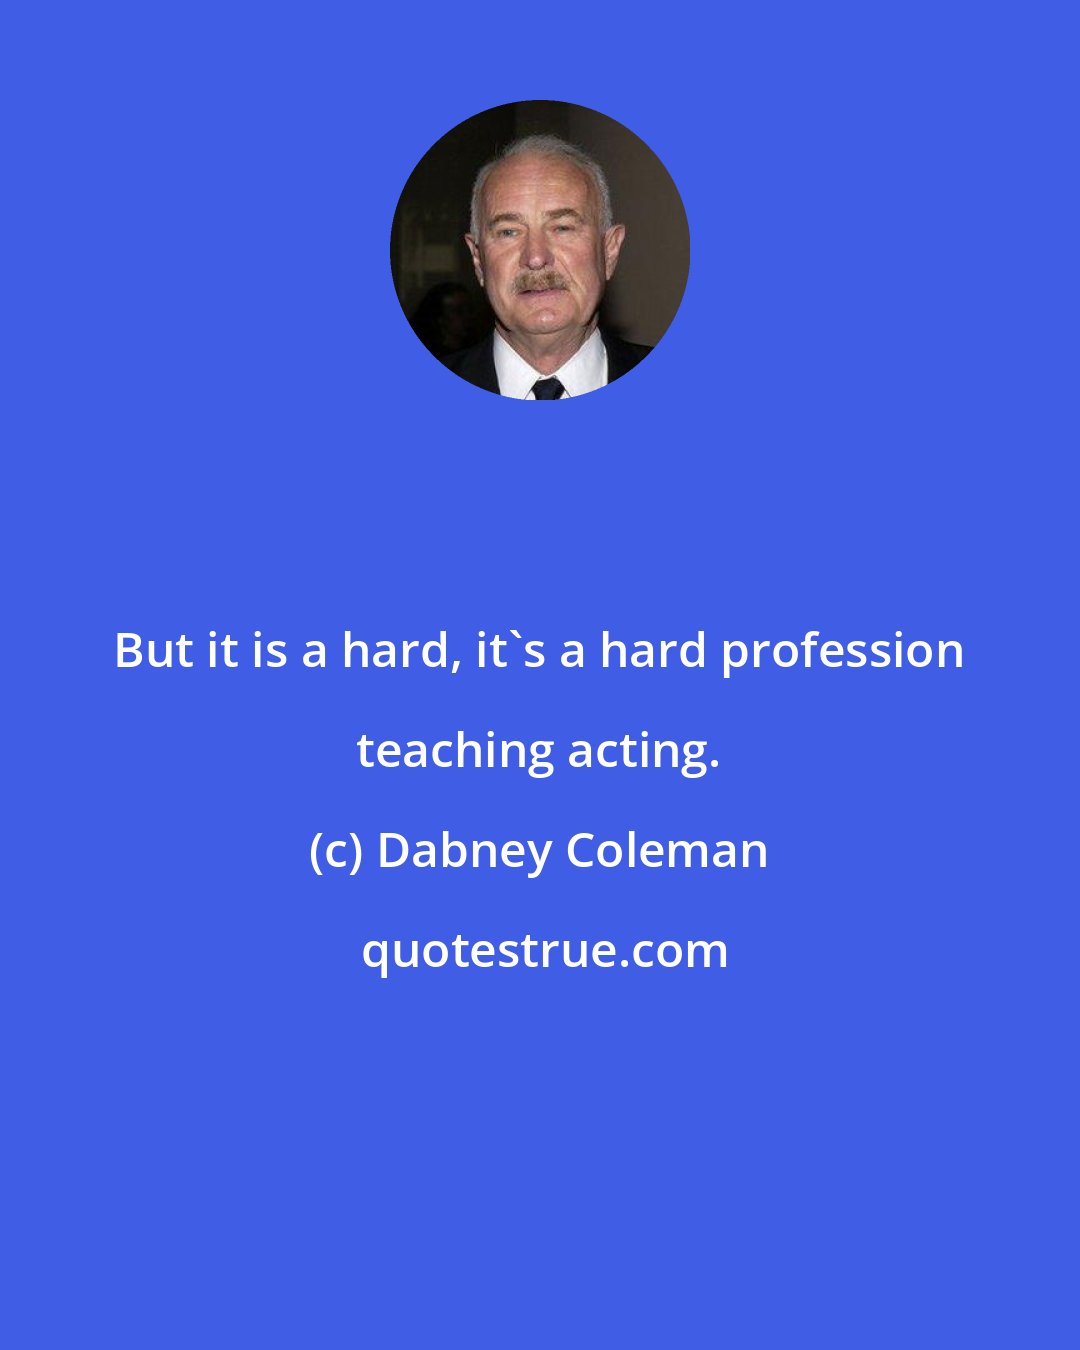 Dabney Coleman: But it is a hard, it's a hard profession teaching acting.